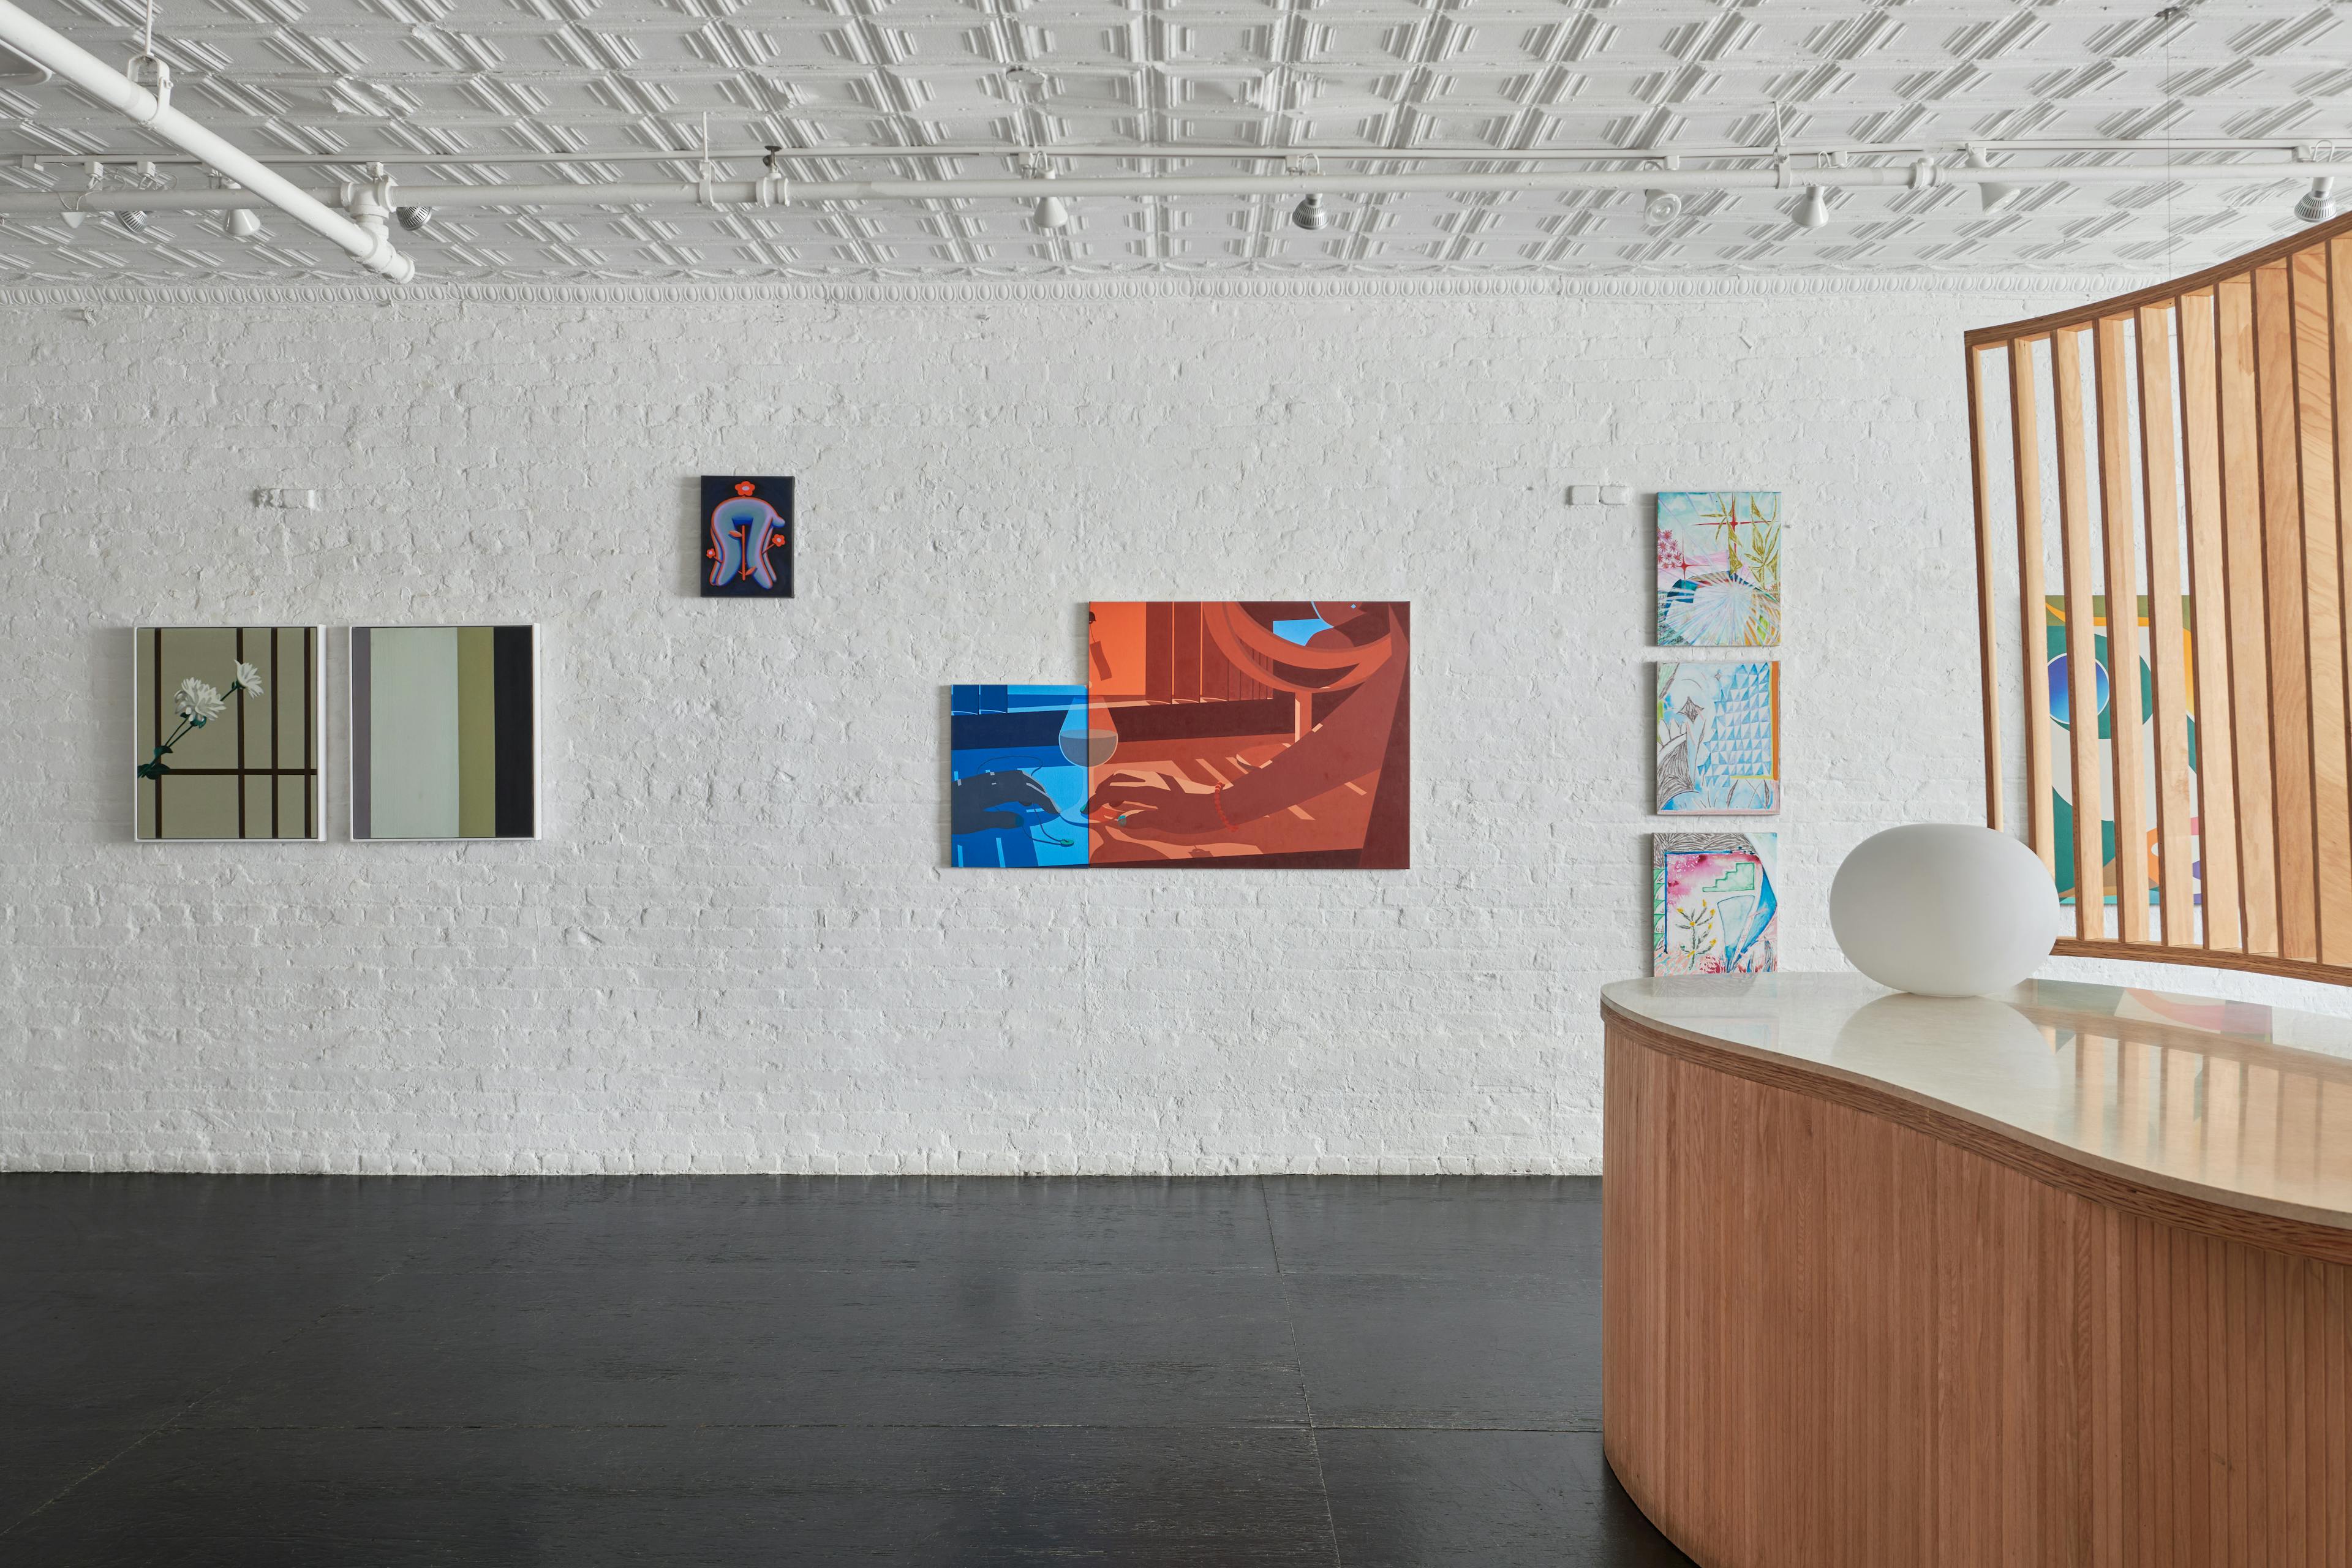 Artwork installed as part of Keepsake, one of Uprise Art's Exhibitions in New York, NY.